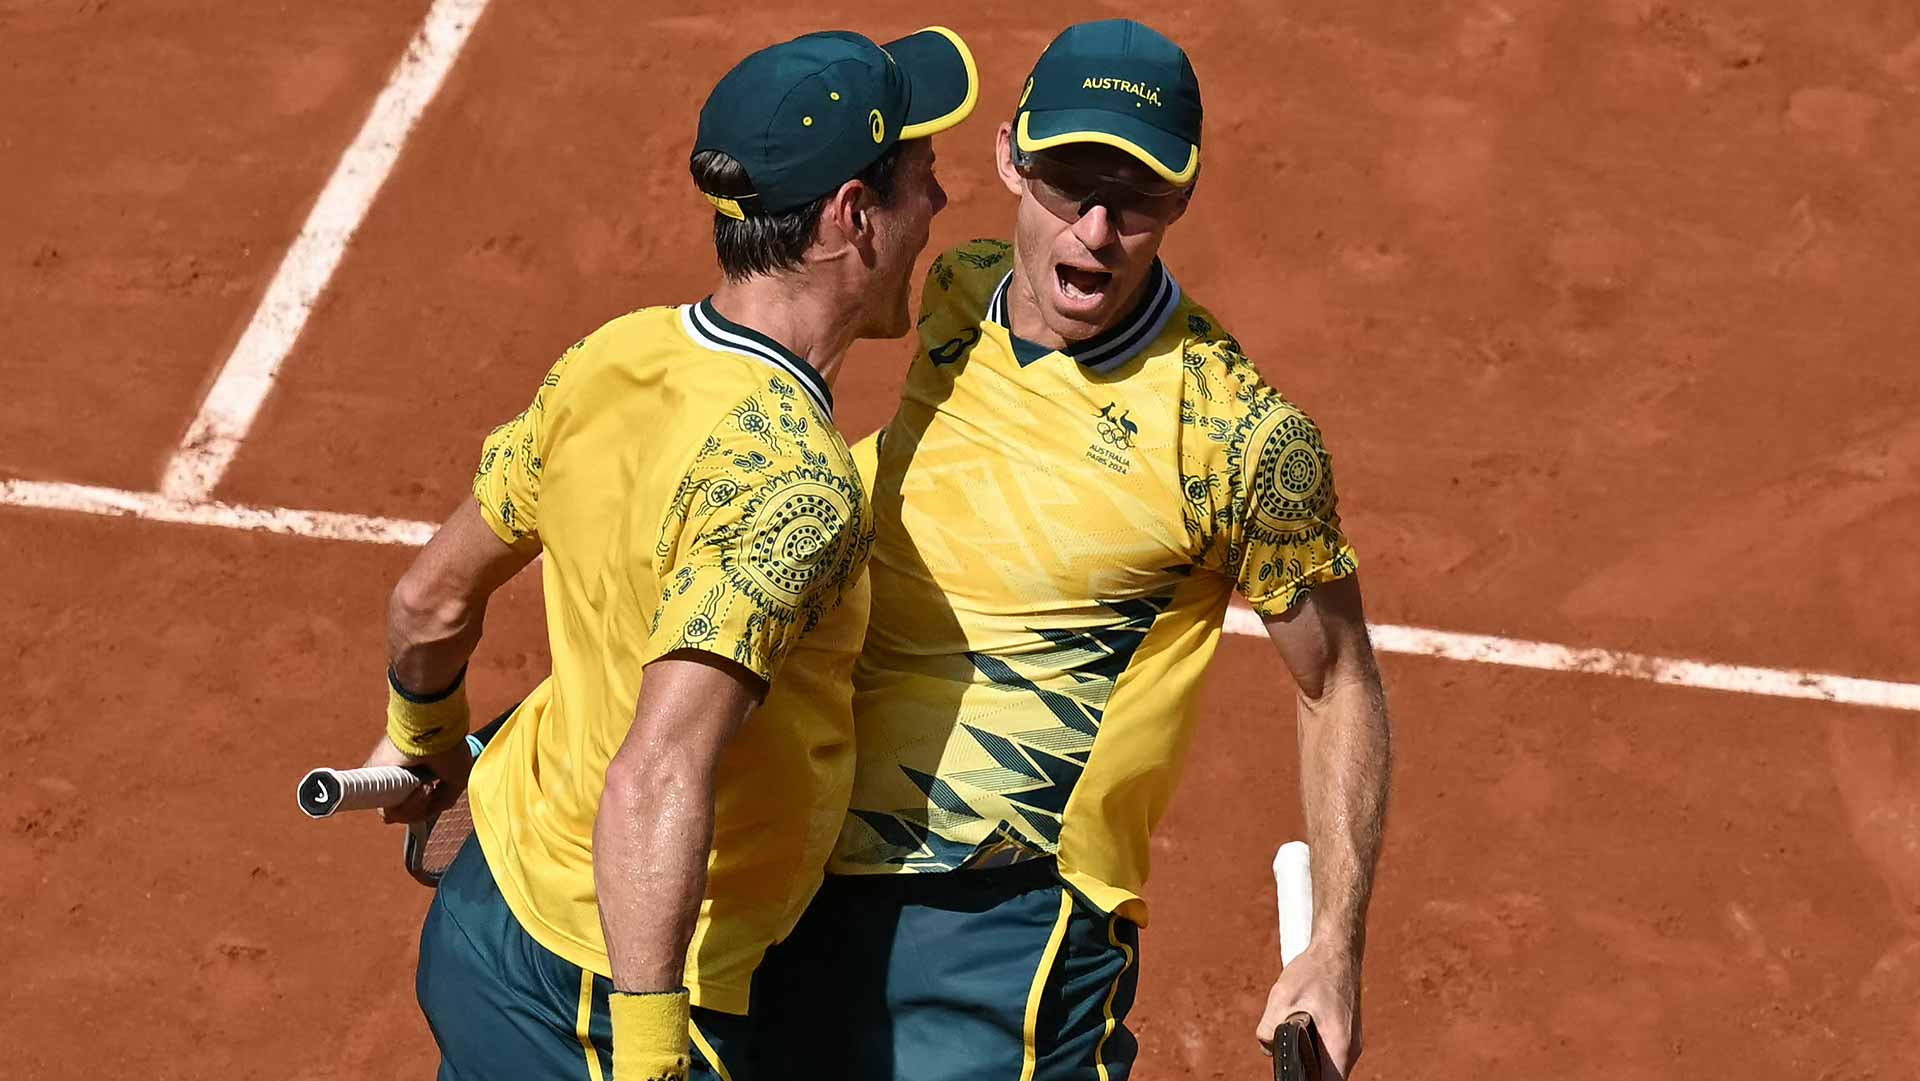 Matthew Ebden and John Peers celebrate their passage to the Olympic doubles gold medal match.